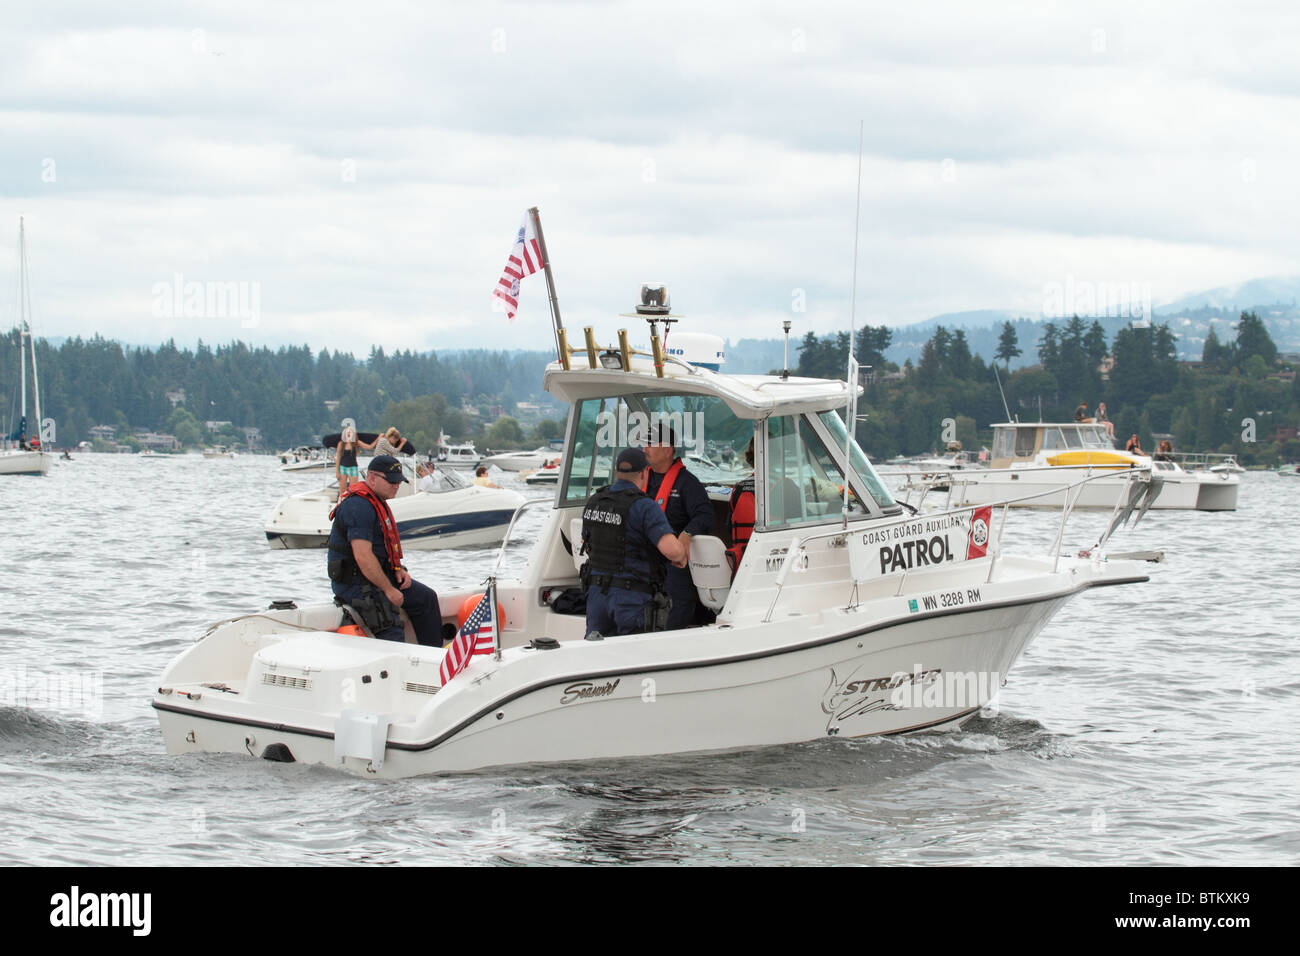 Coast Guard Auxiliary crew providing security at the Seafair Airshow on Lake Washington. Appears to have fully commissioned crew Stock Photo